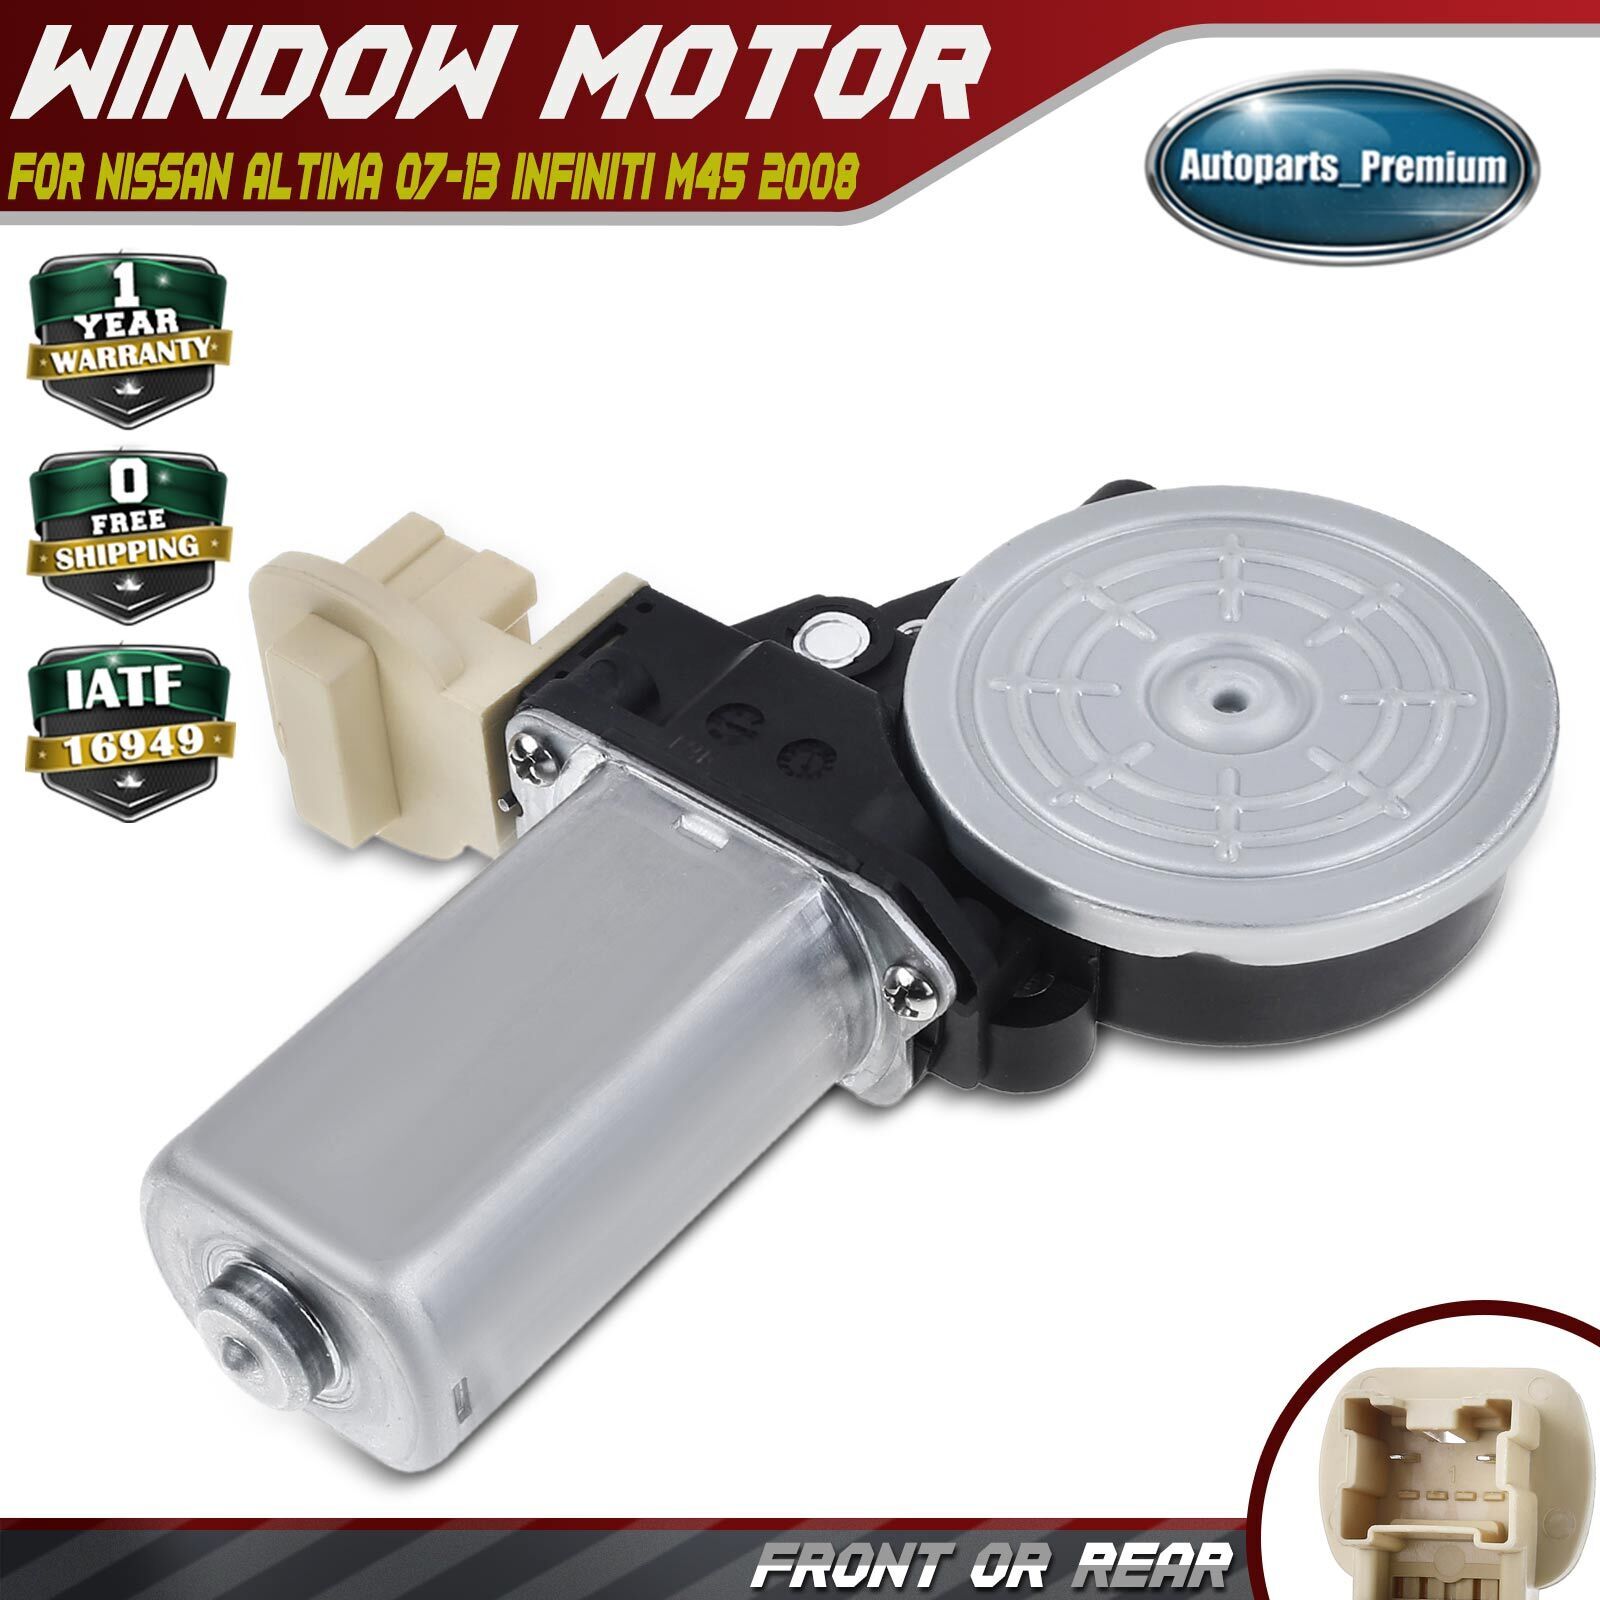 Window Motor for Nissan Altima 2007-2013 Infiniti M45 2008 Rear or Front Right